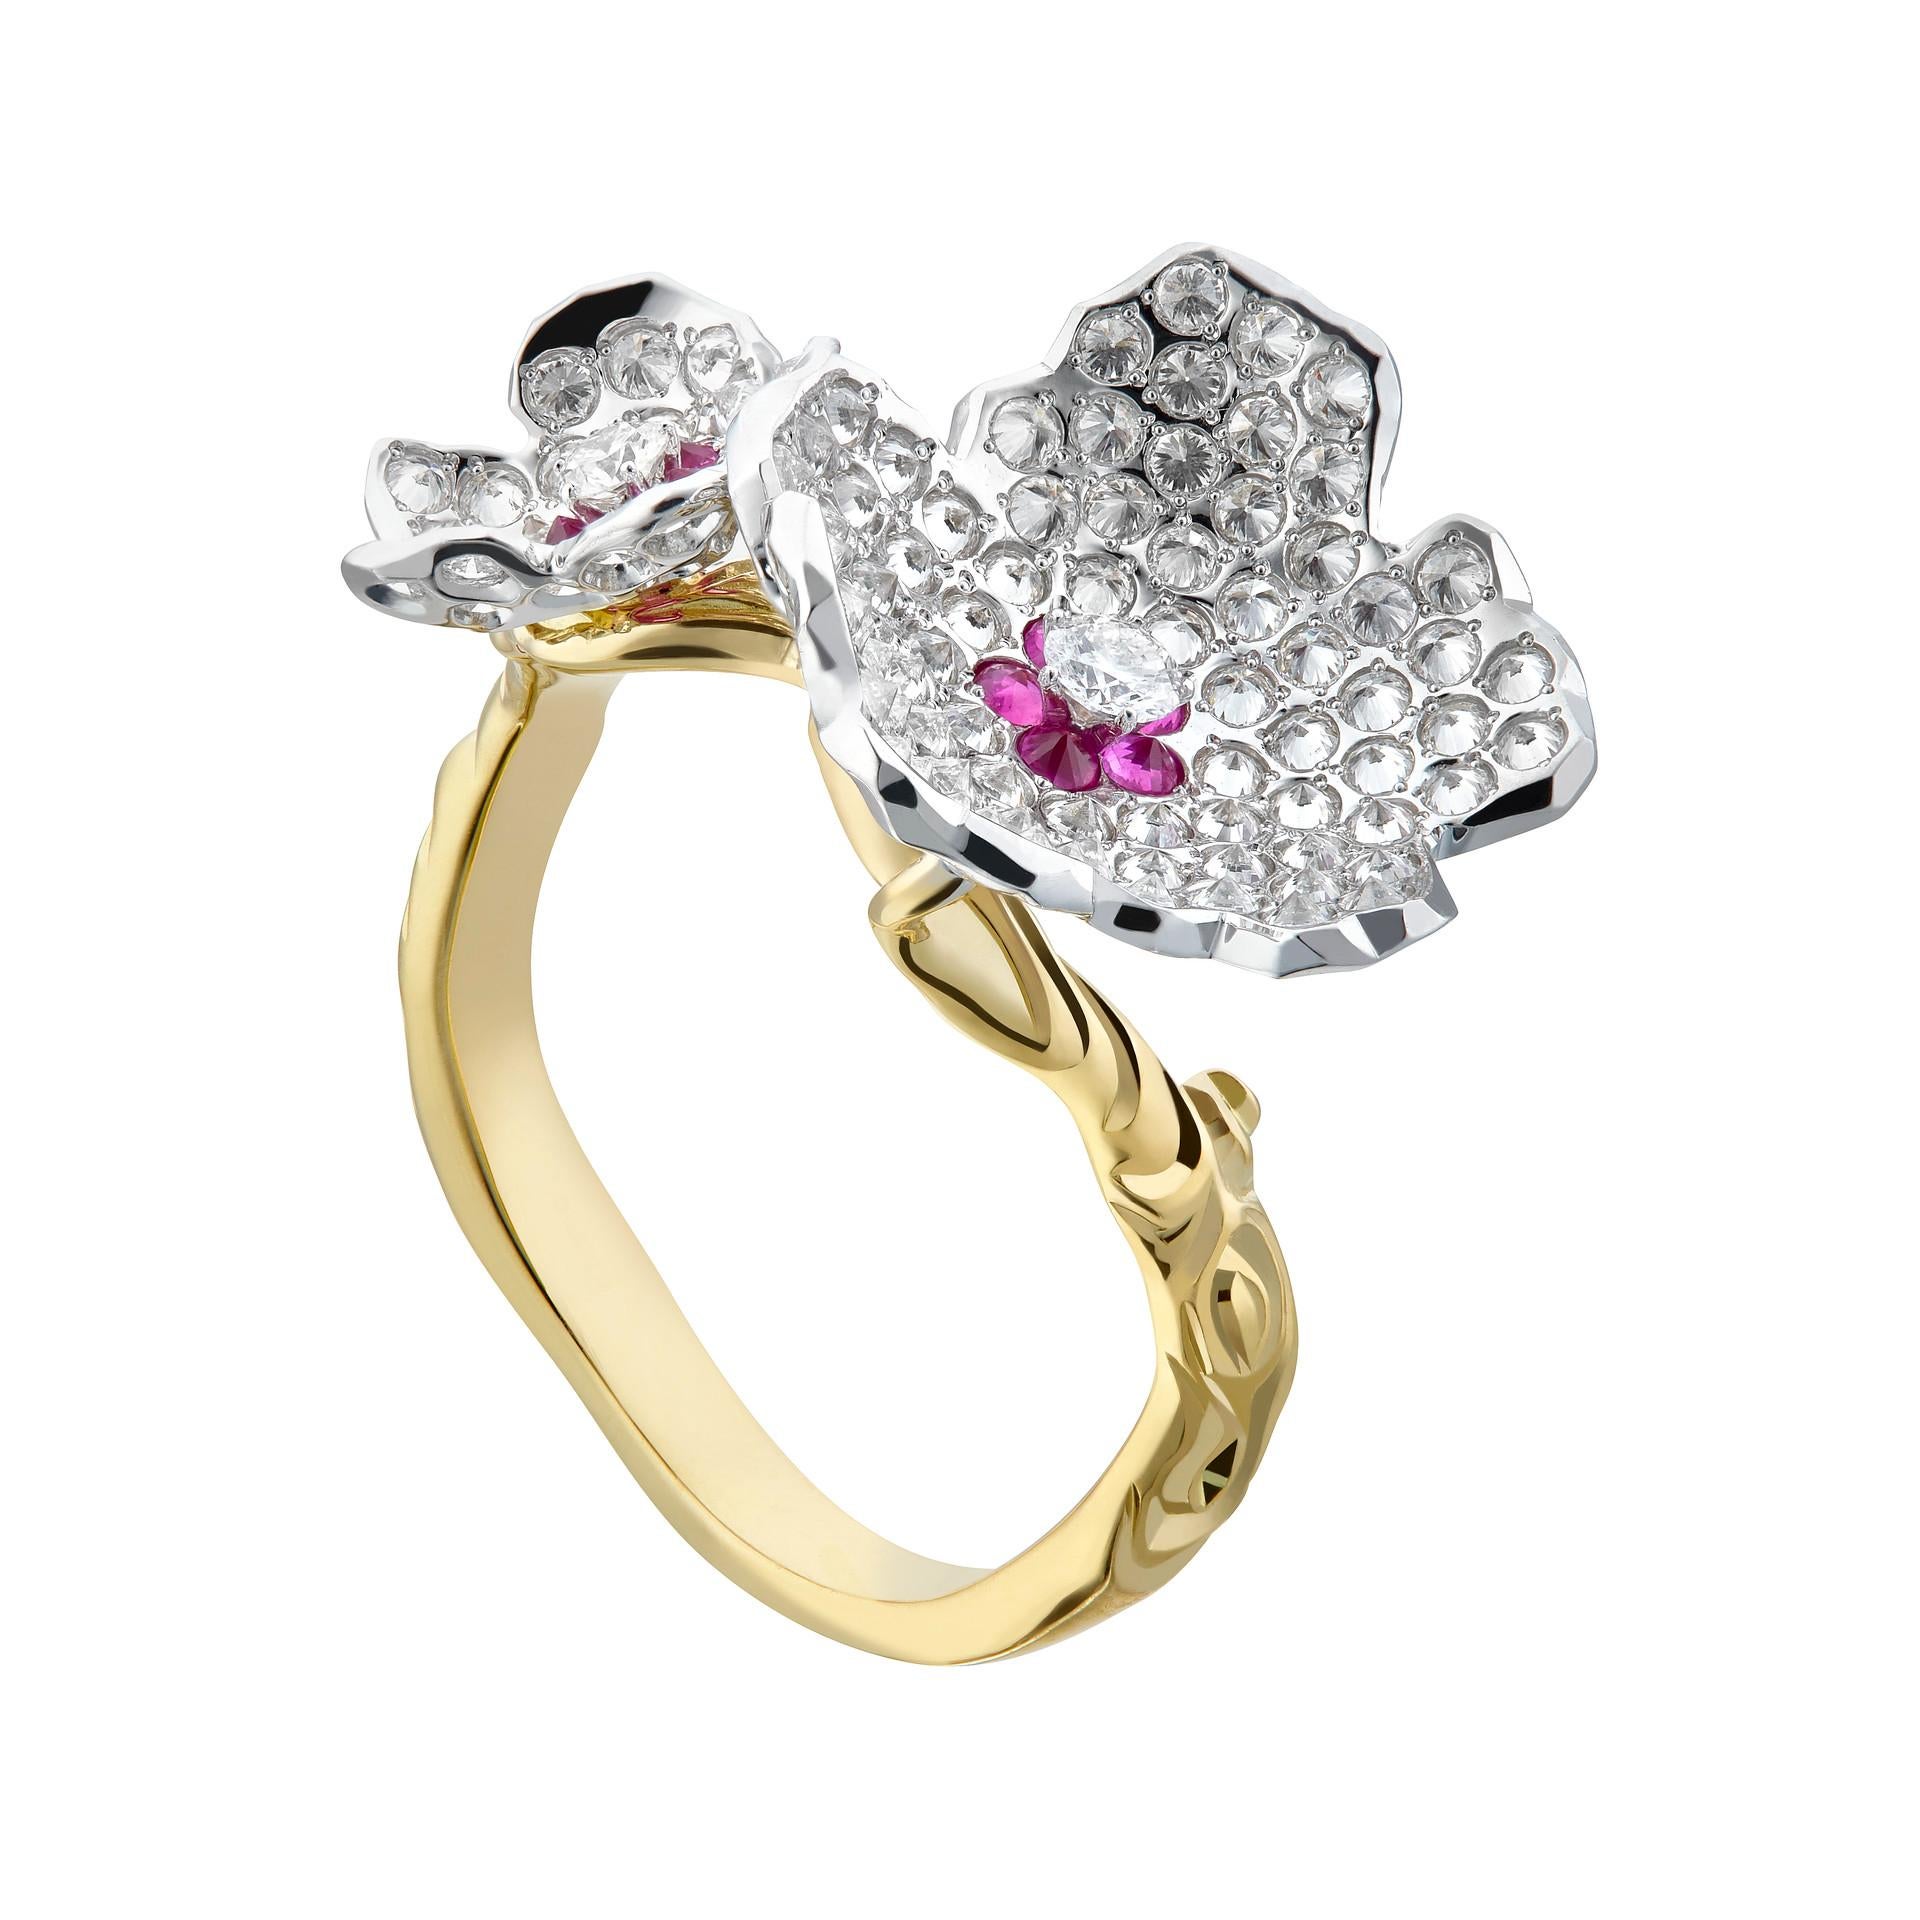 The early flowering almond tree heralds the beginning of spring and new life. Being the symbol of hope, abiding love and friendship, Almond Blossoms Collection by MOISEIKIN is a hymn to the Woman’s Beauty. 

This feminine flower ring consists of